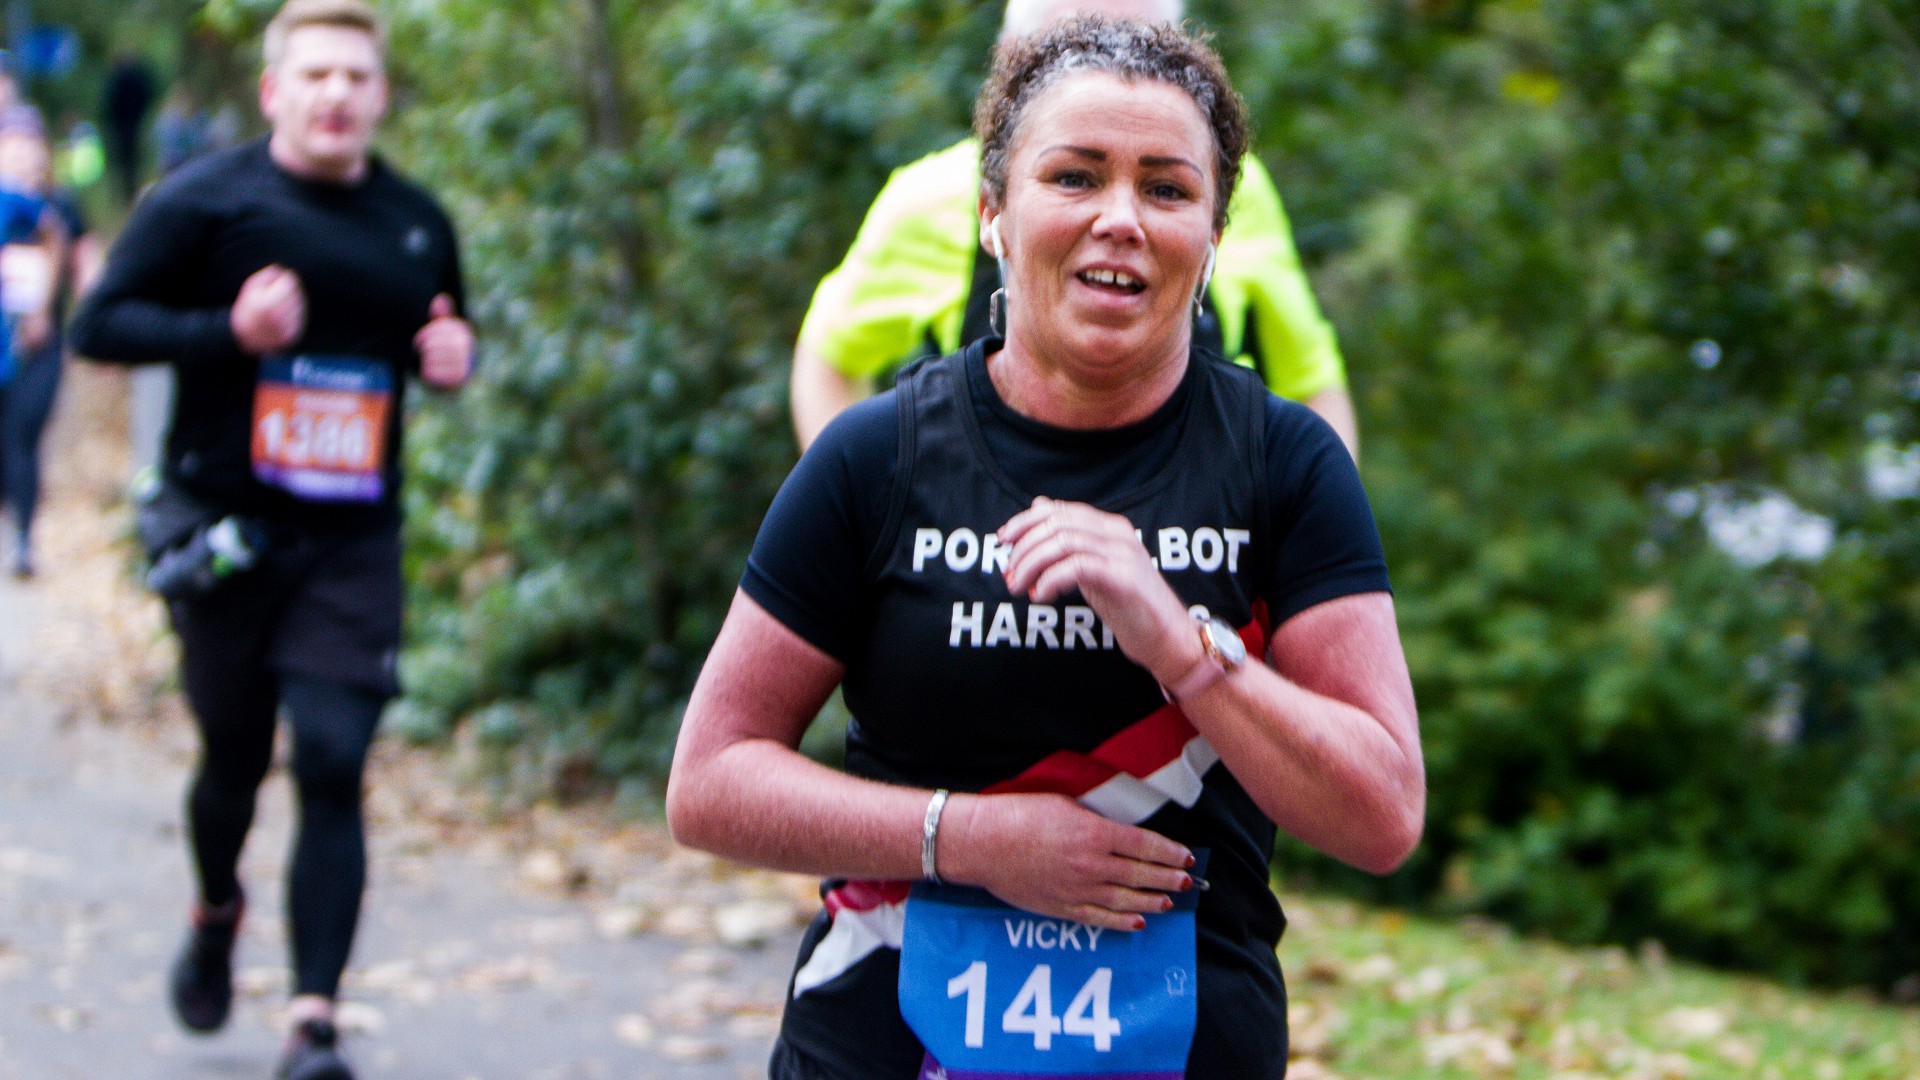 Front Runner Events are proud to announce the take-over of the Port Talbot Half Marathon